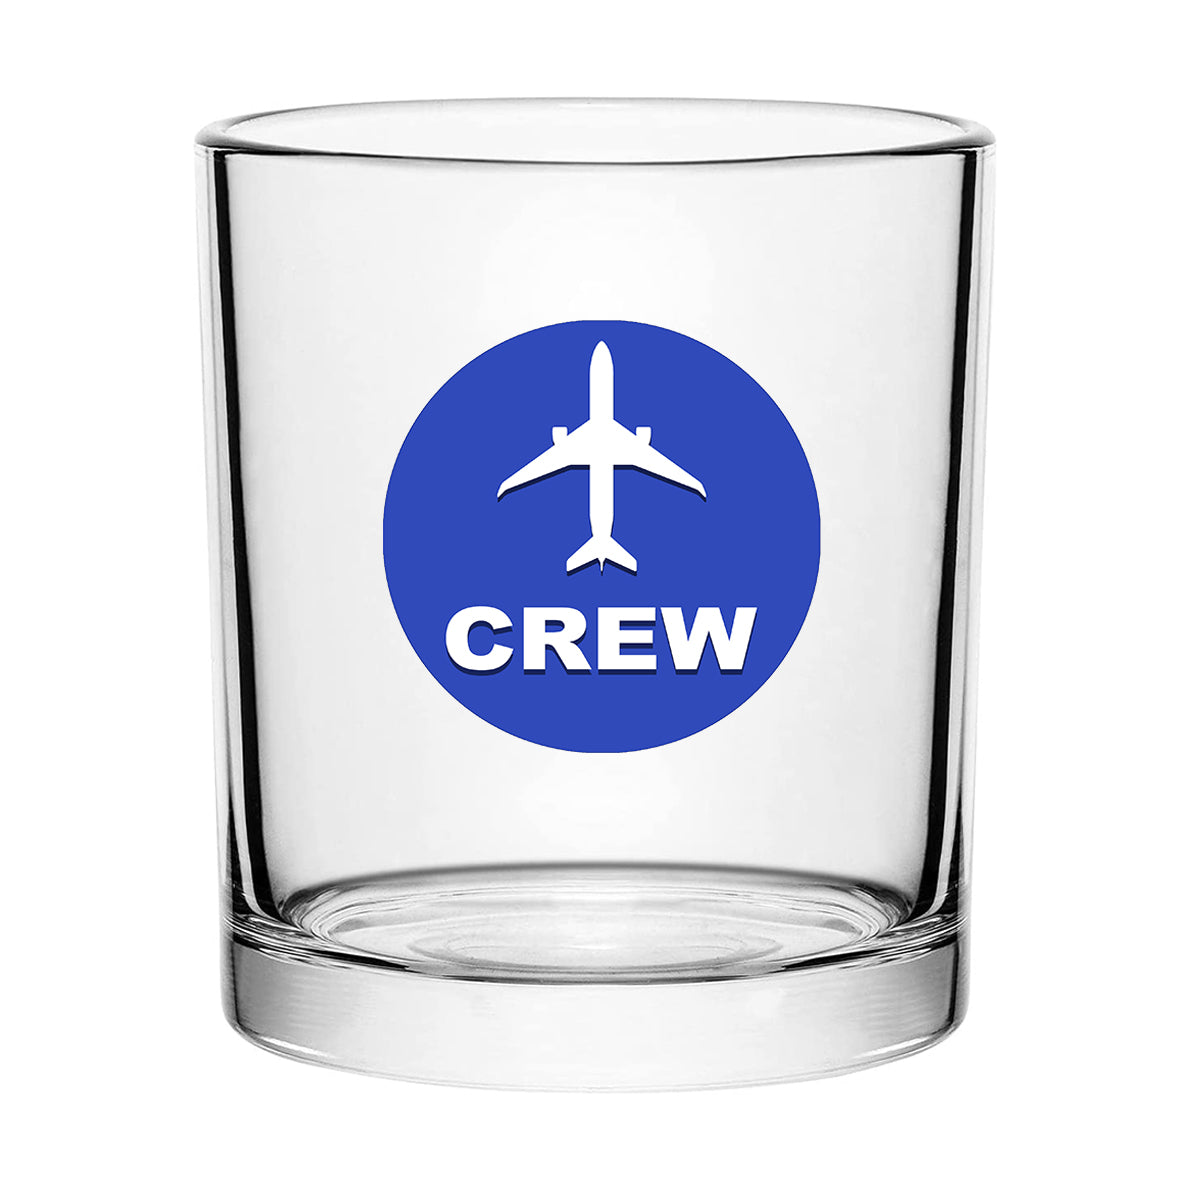 Crew & Circle Designed Special Whiskey Glasses